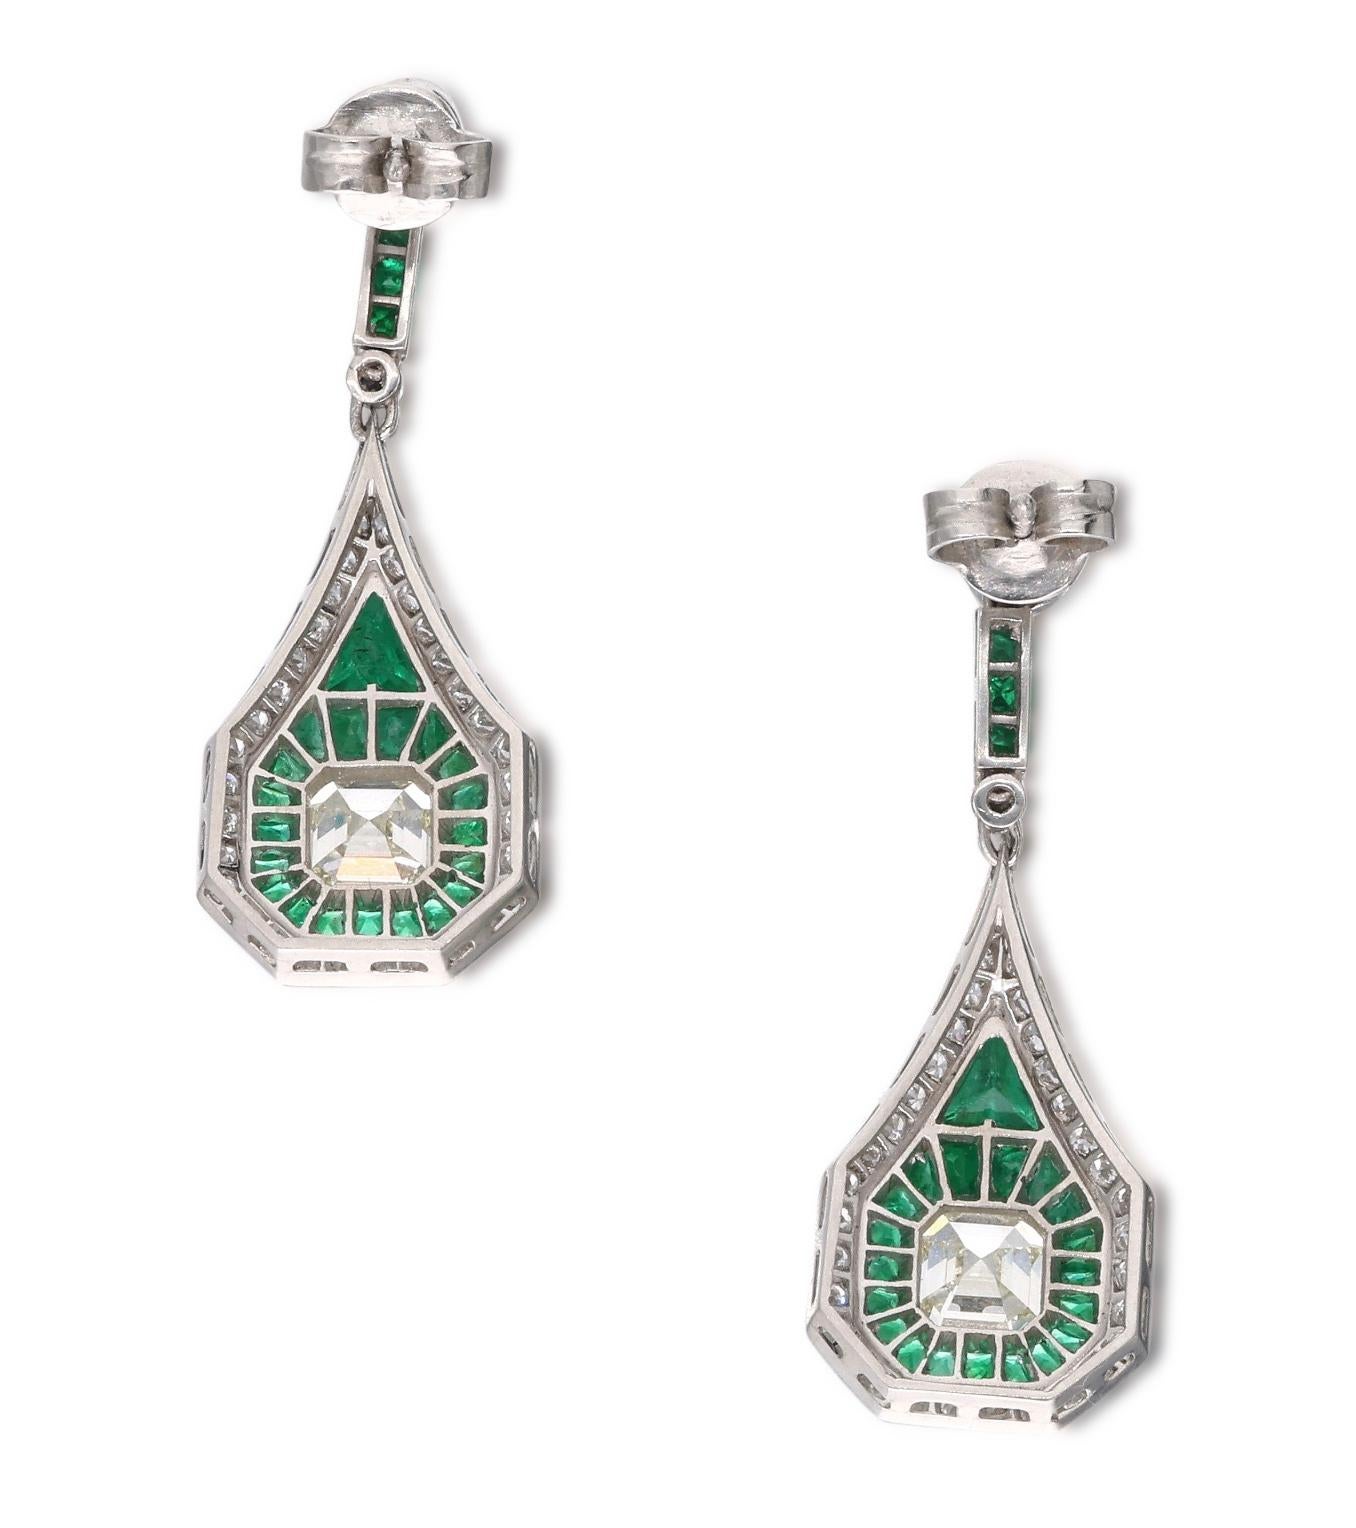 A pair of beautiful art deco inspired drop earrings that feature square emerald cut diamonds, which are accented by Old European cut diamonds and emeralds. The square emerald cut diamonds weigh a total of approximately 2 carats, and the Old European